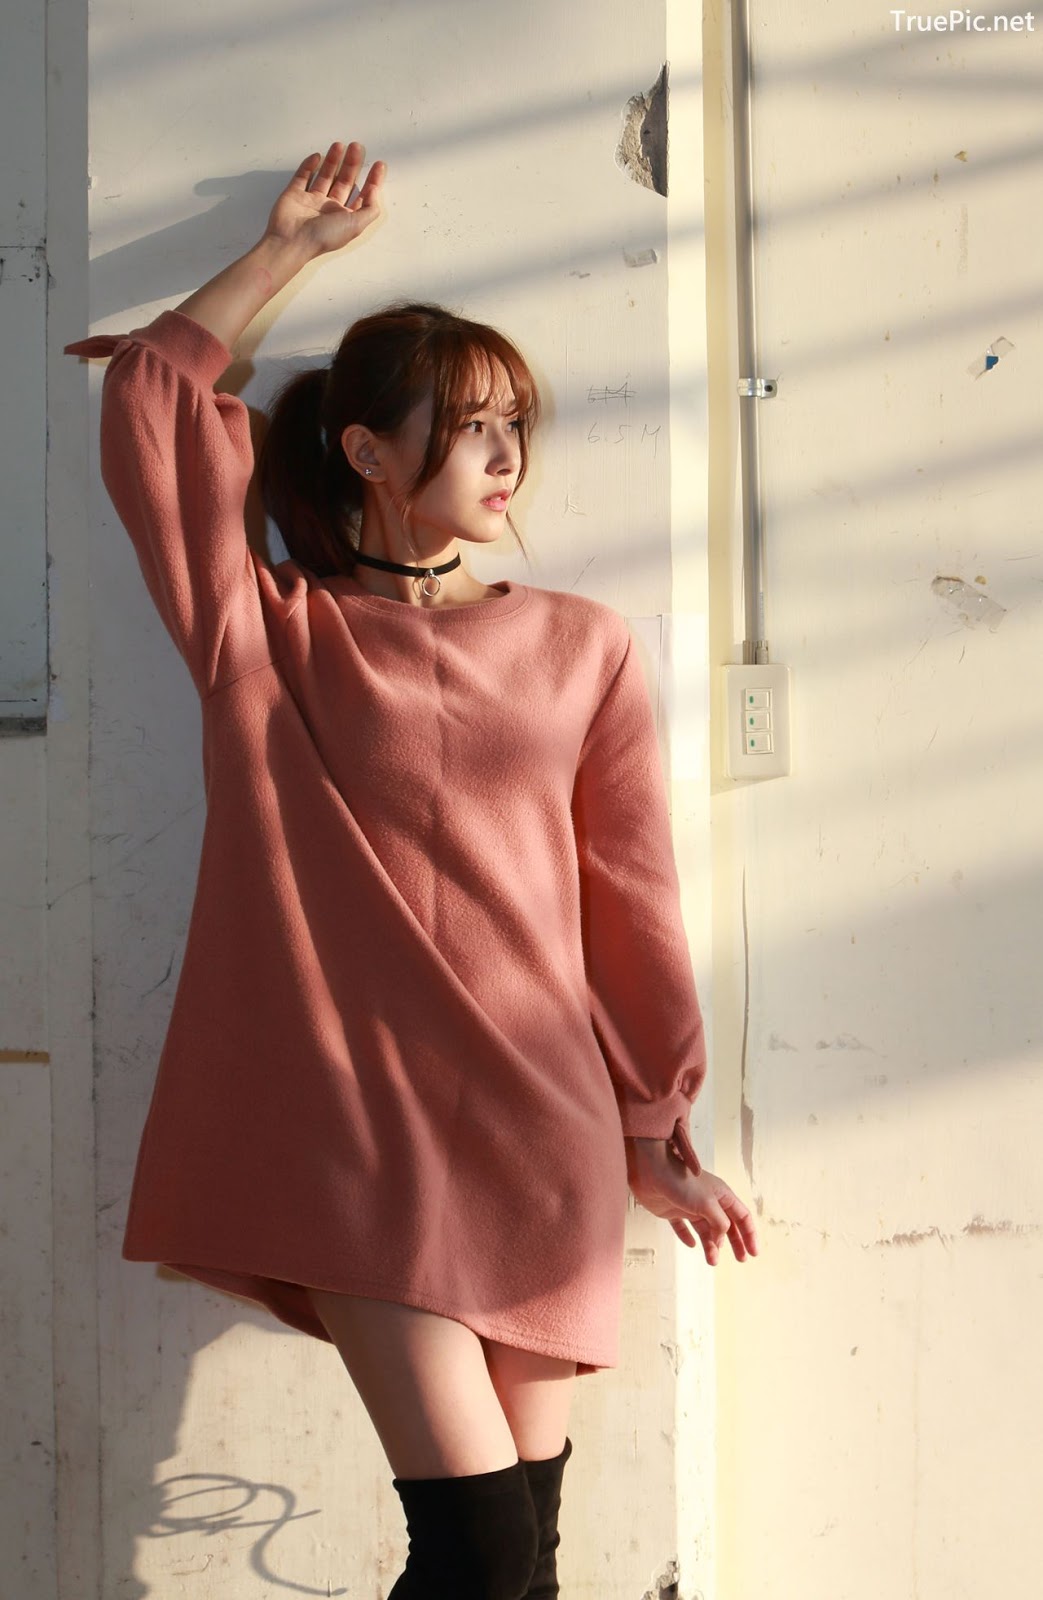 Image-Taiwanese-Model-郭思敏-Pure-And-Gorgeous-Girl-In-Pink-Sweater-Dress-TruePic.net- Picture-83